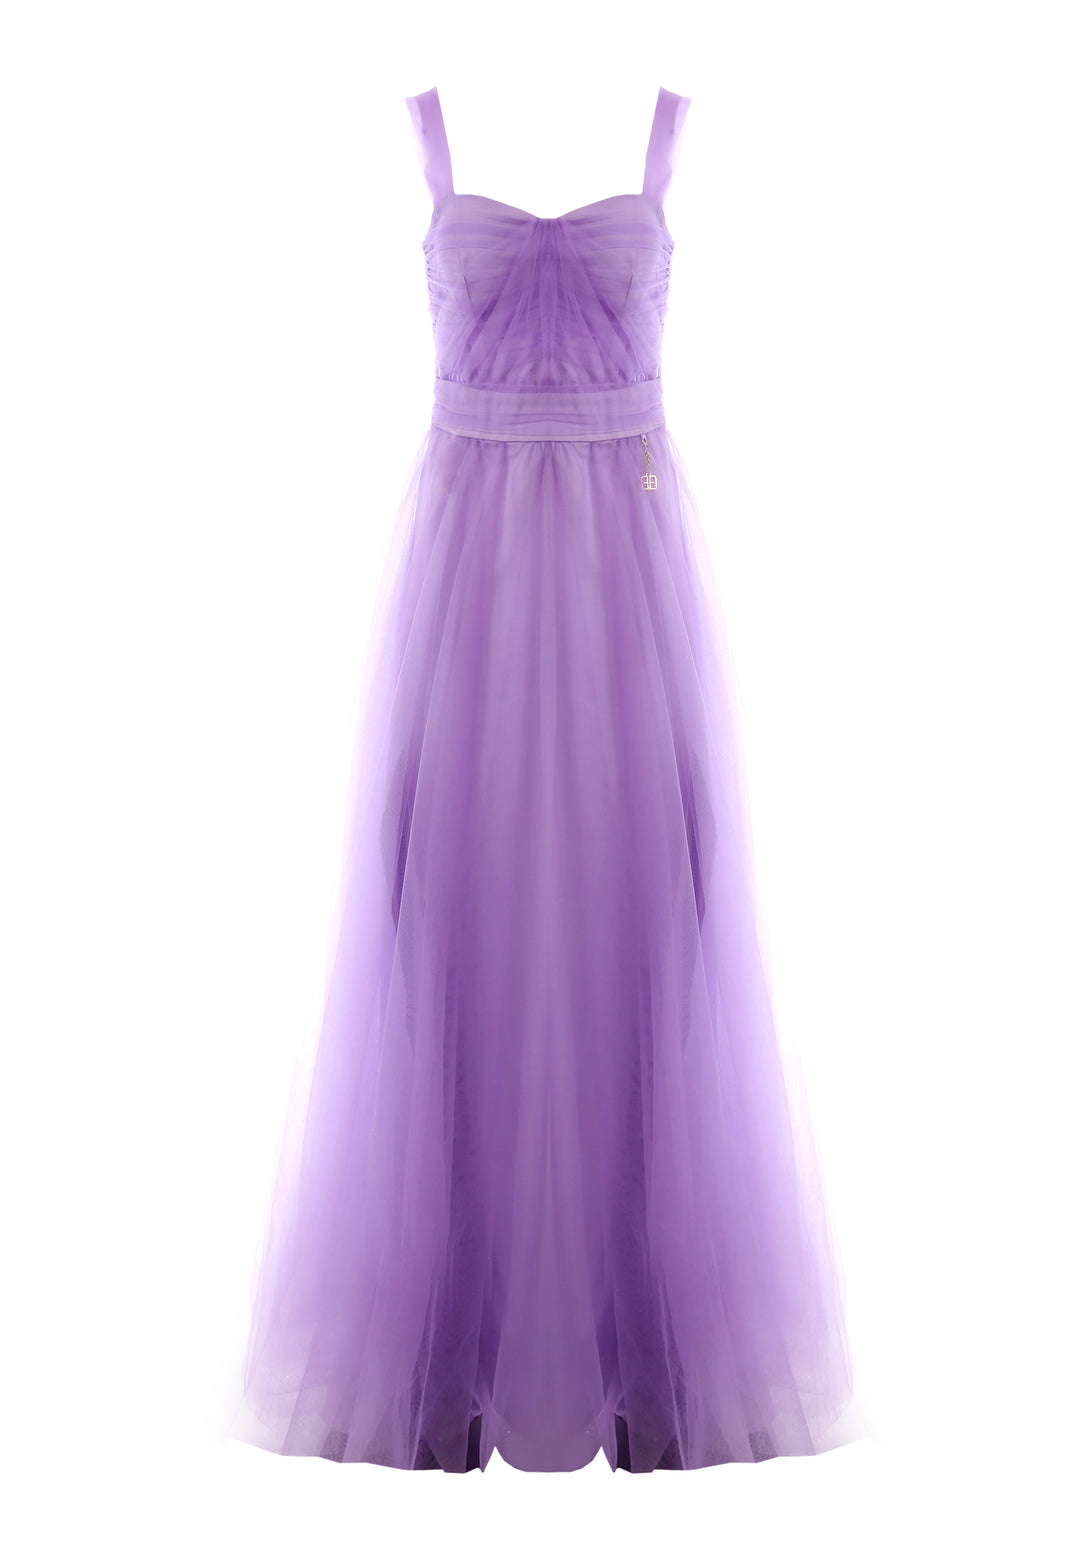 Long sleeveless dress with tulle